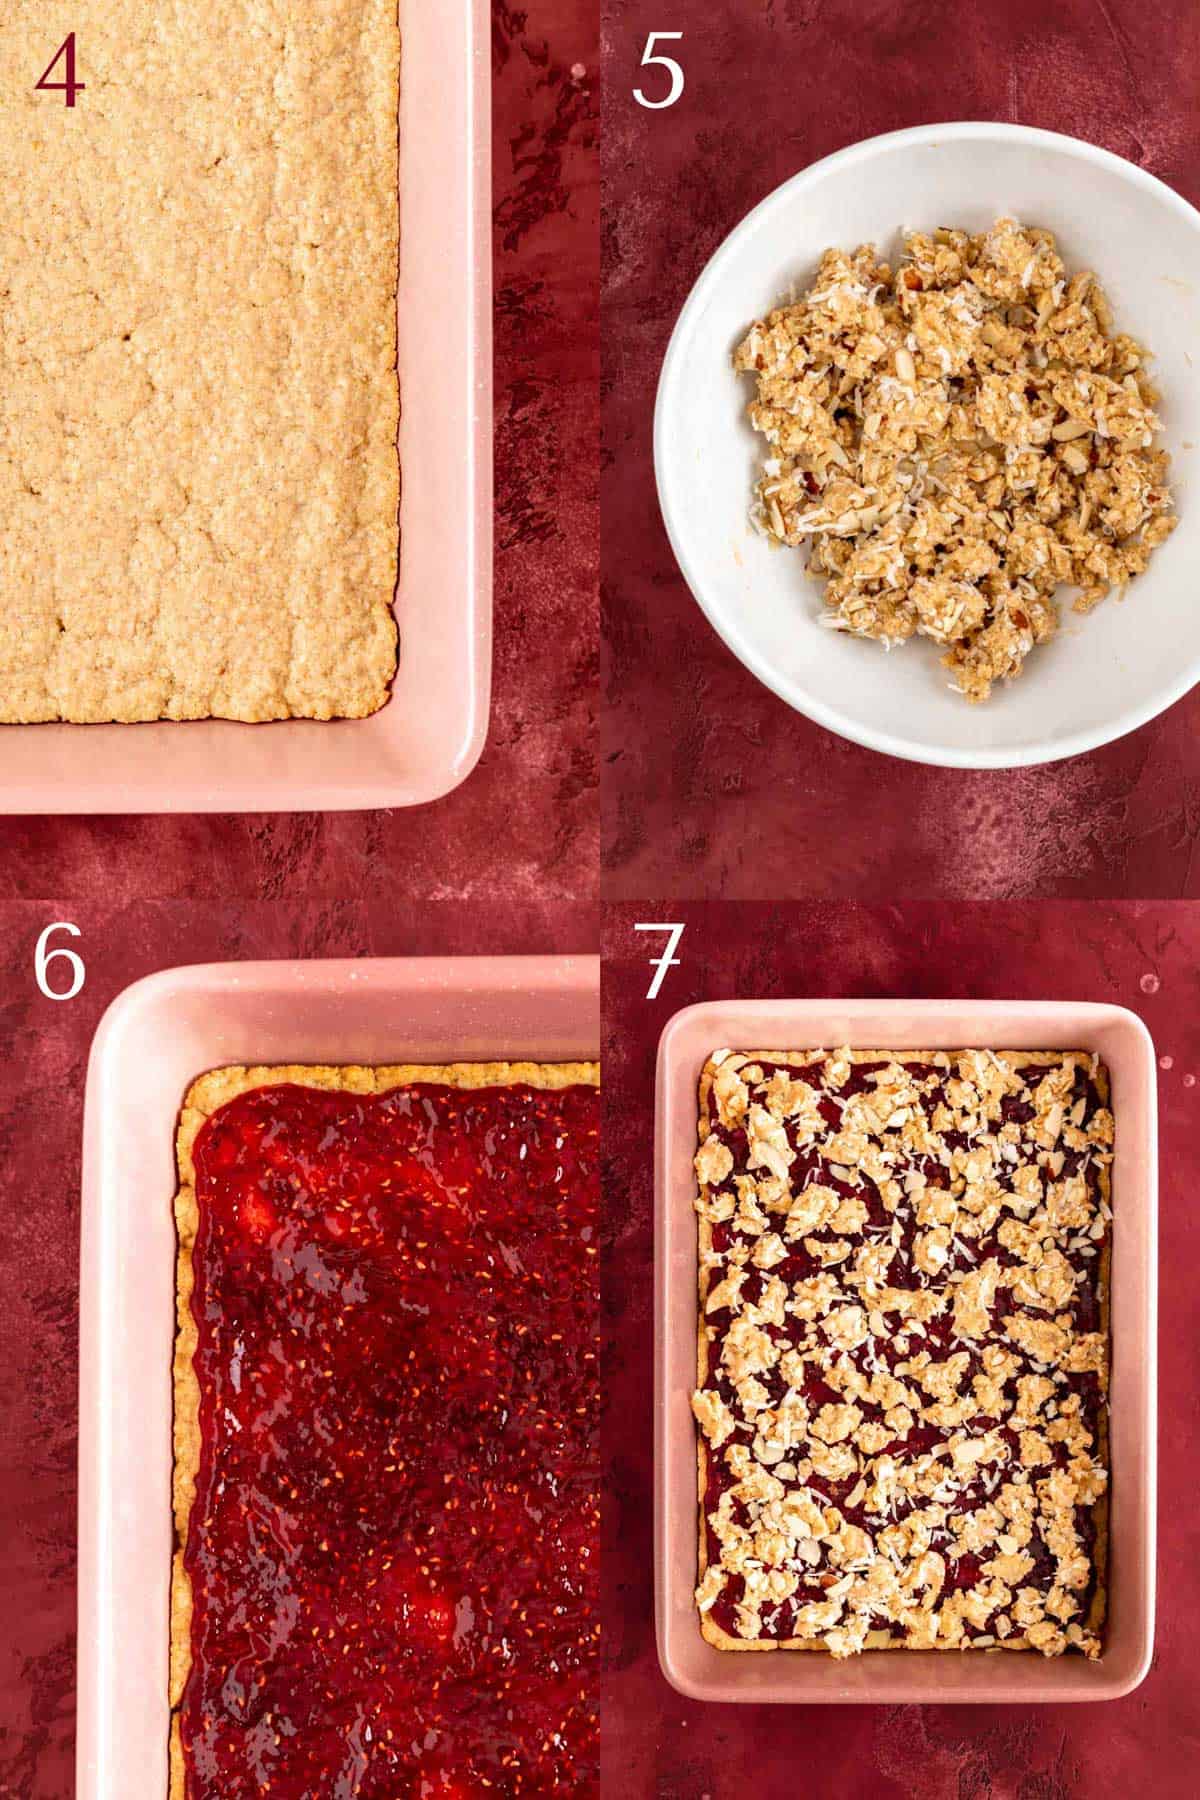 baked crust, topping dough, jam on the crust, and crumbs over jam before baking process steps.